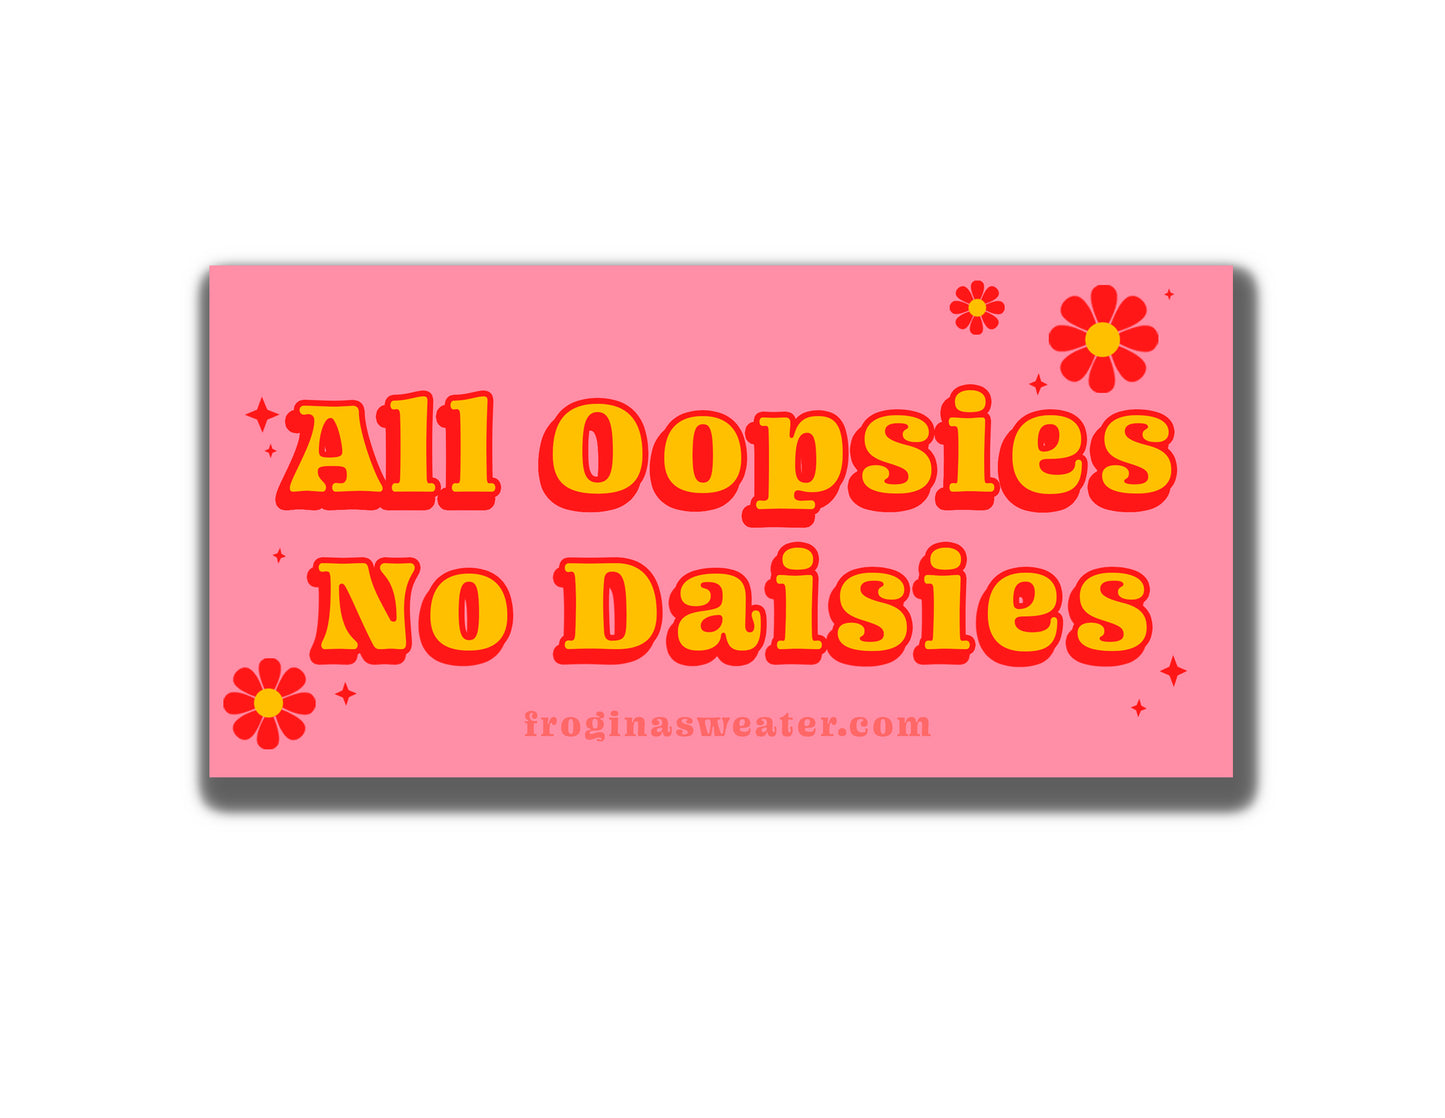 All Oopsies no daisies bumper sticker